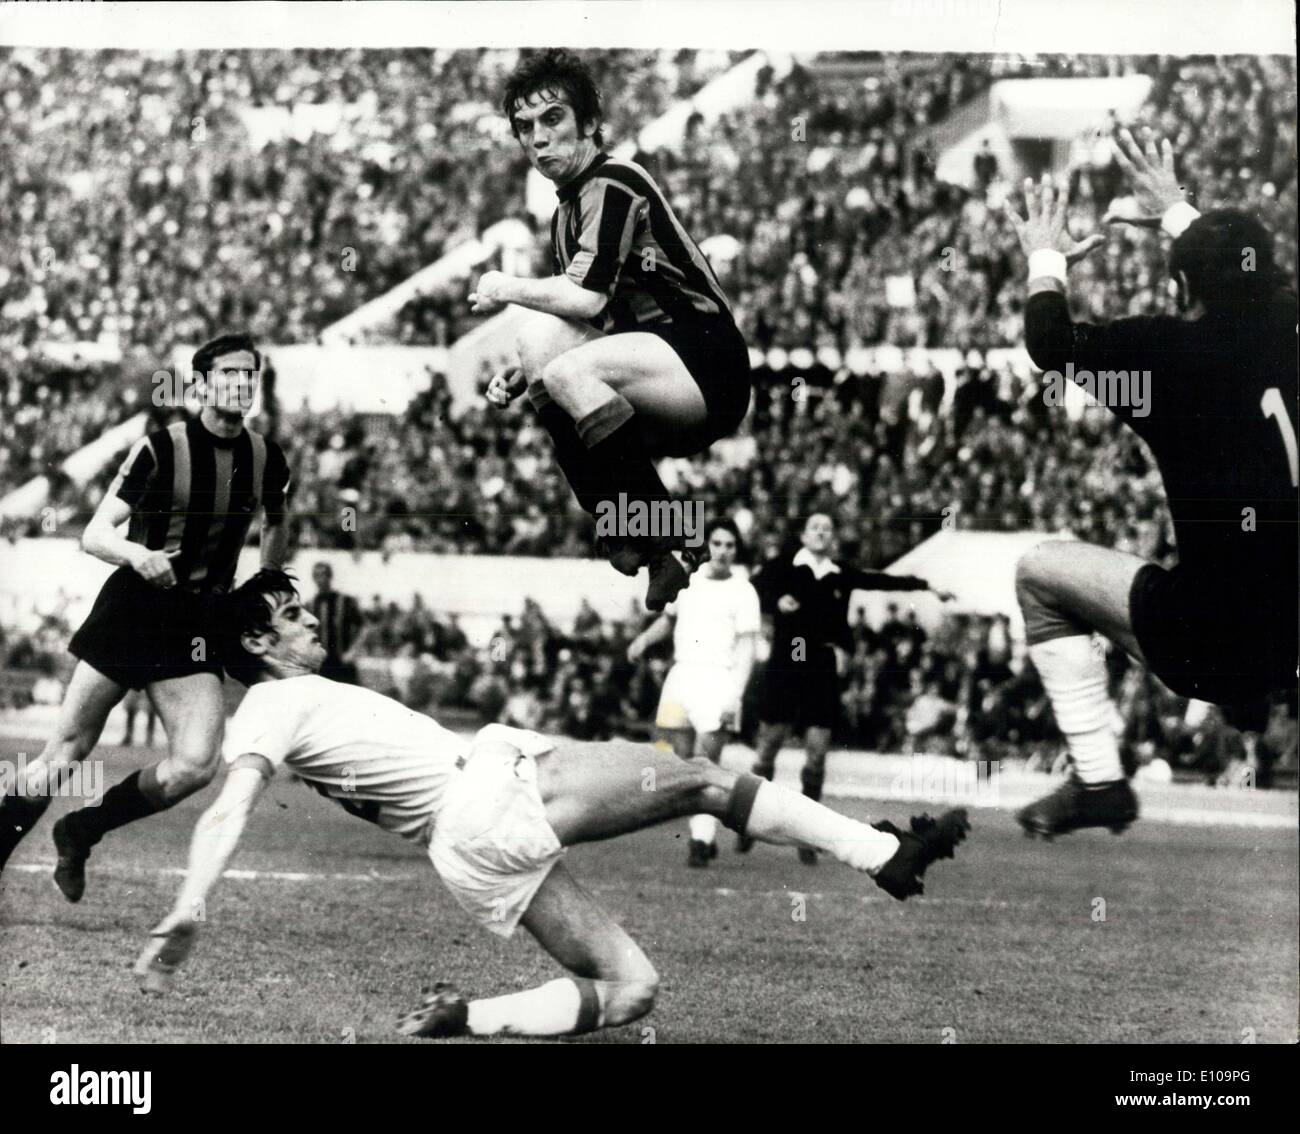 Mar. 26, 1970 - Up in the Air: An all-action picture taken during the soccer match at the Olympic Stadium in Rome, between Lazio of Rome and Internationals of Milan - showing an expressive study of the Inter center-forward Pino Boninsegan leaps high over Giorgio Papadopulo, the Laio right-back. On left is Giacinto Facchetti of Inter and on right is Lazio's goalkeeper Rosario Di Vencenzo, Lazio won 3-1. Stock Photo